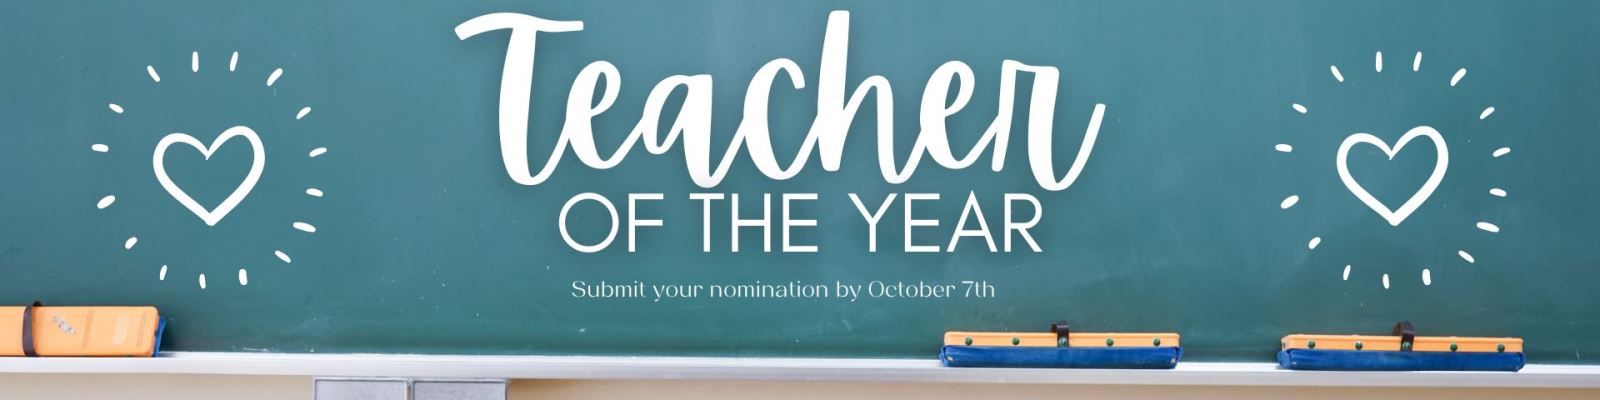 Submit your nomination for Teacher of the year